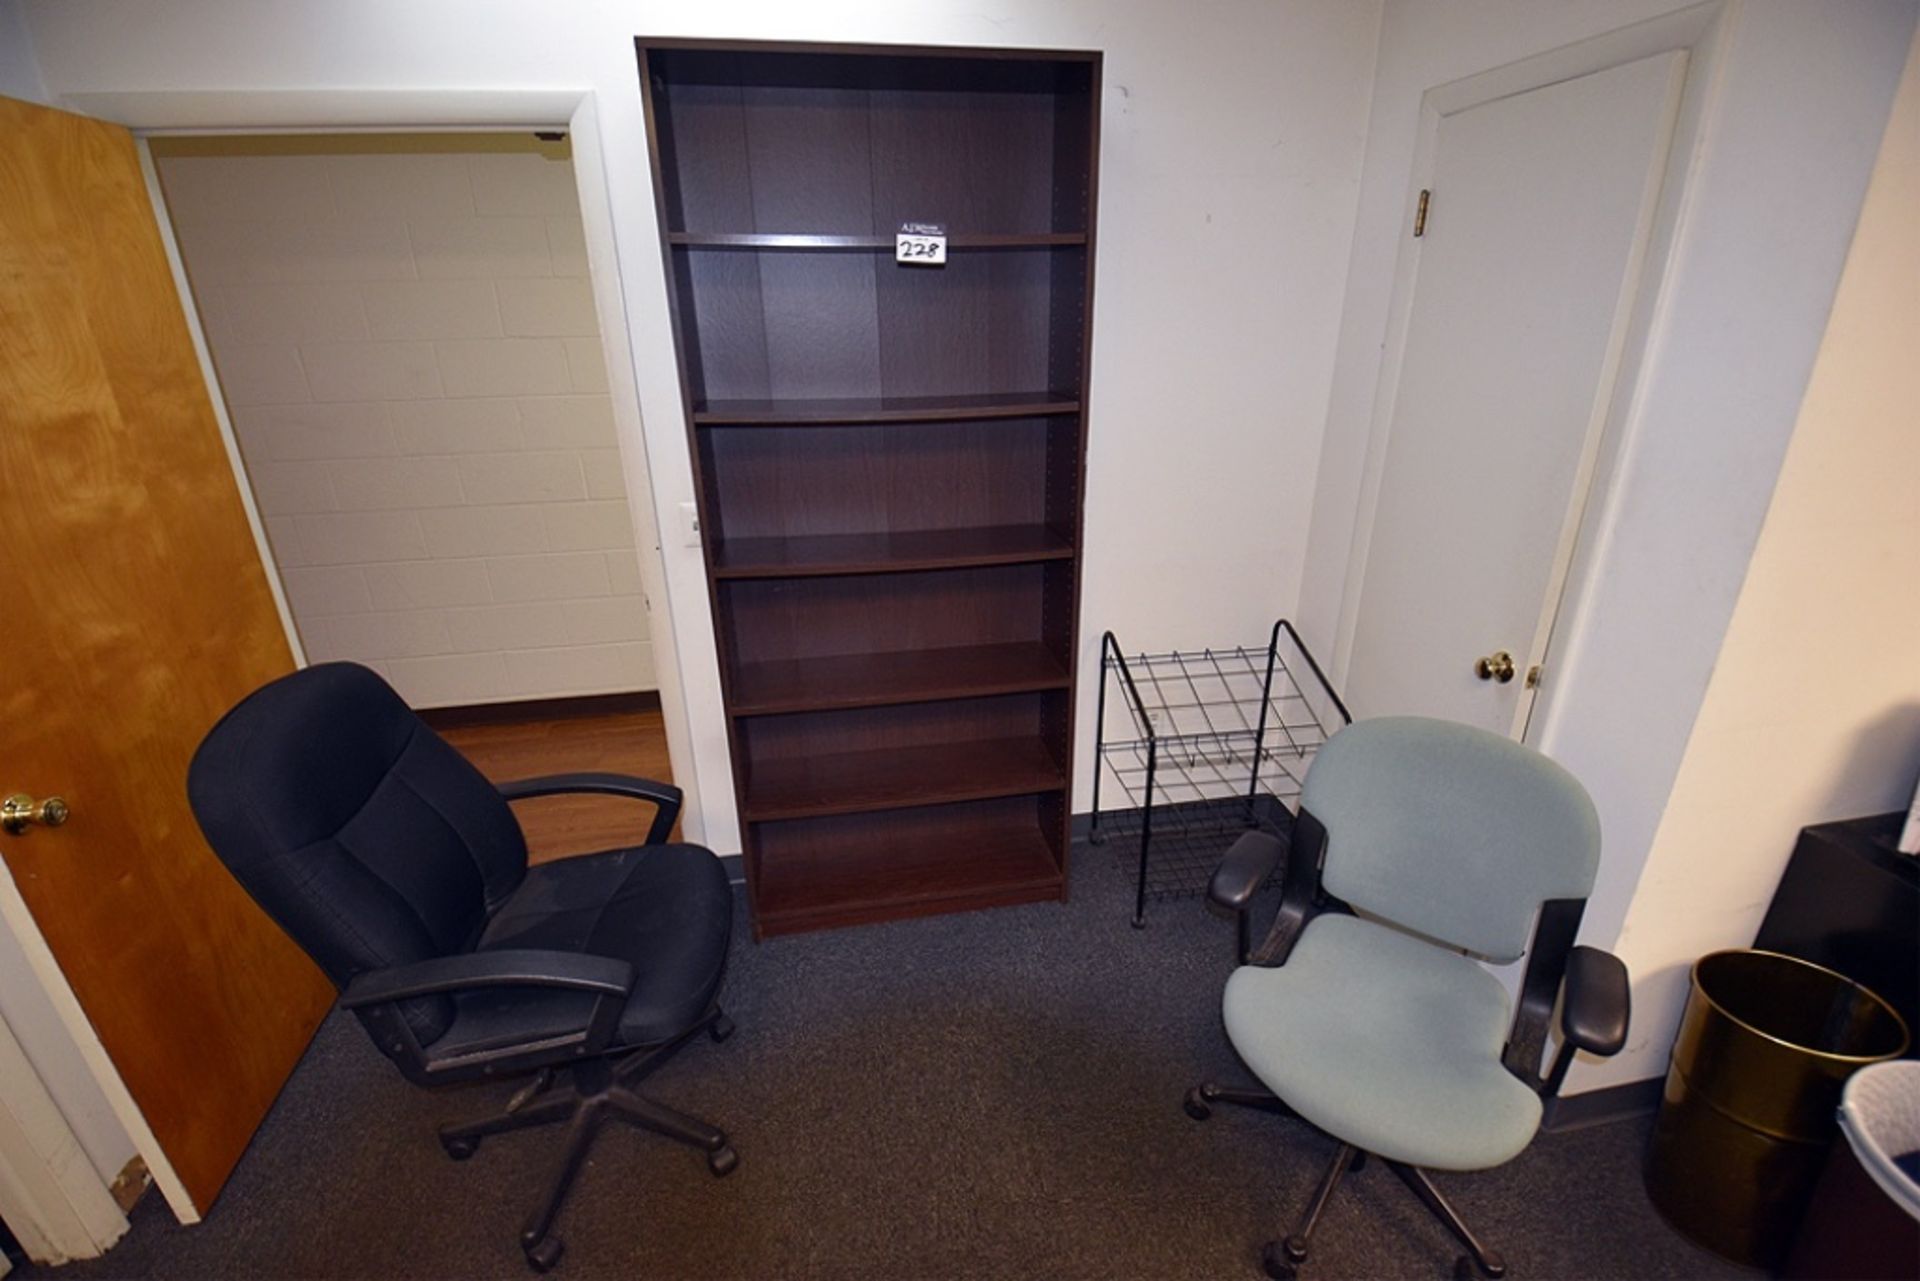 Desks, Shelves, Office Chairs, and File Cabinets Throughout Office - Image 2 of 3